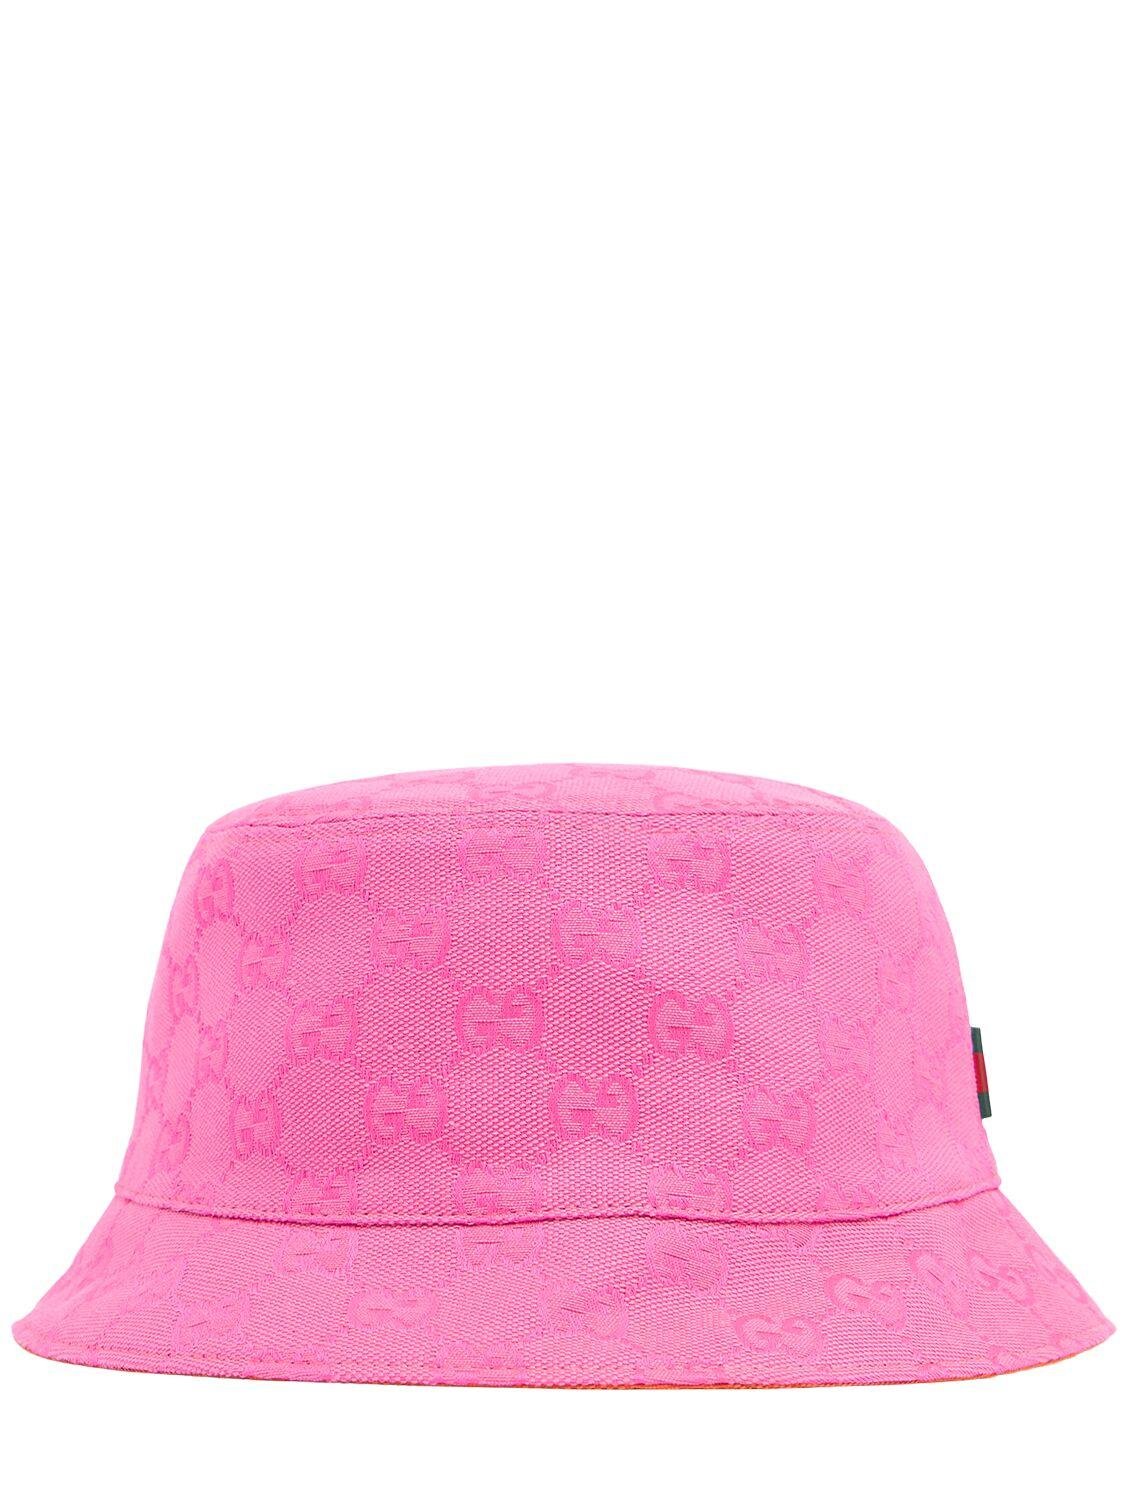 Gg Canvas Bucket Hat by GUCCI